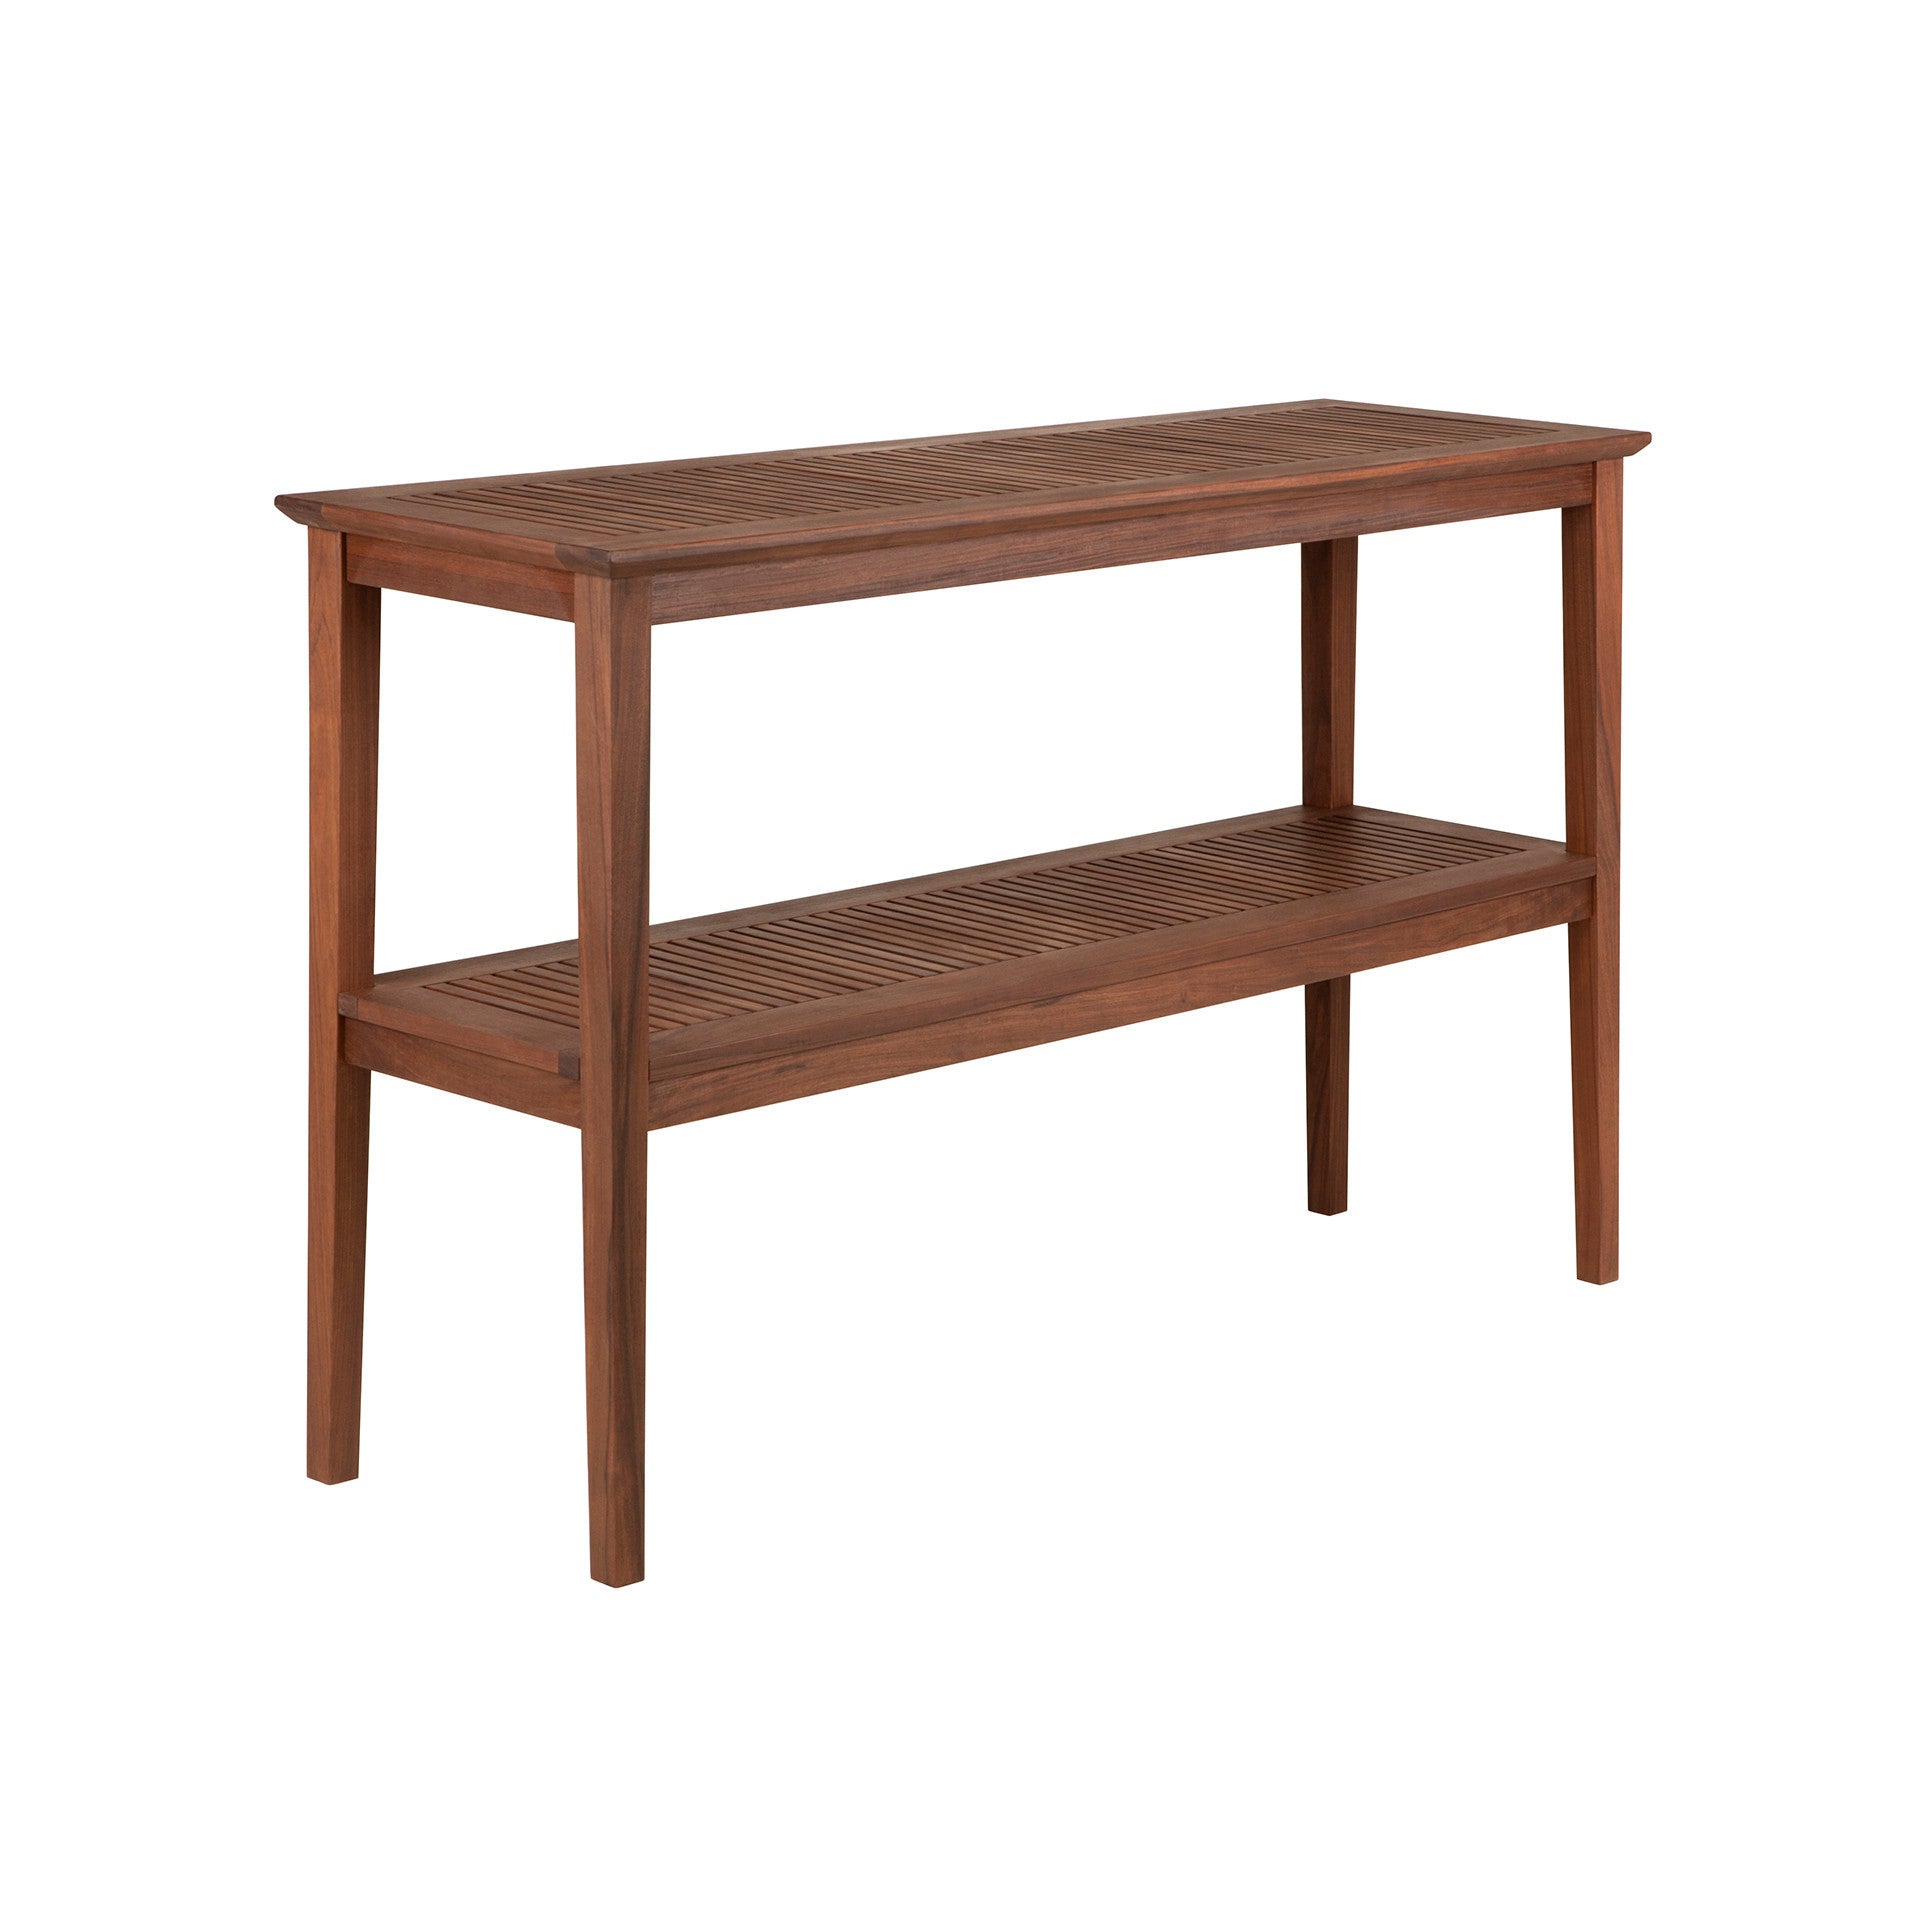 Shop Local Spokane Valley, WA for the best Outdoor Patio Opal Console Table from Jensen Leisure available at Jacobs Custom Living in Spokane Valley, WA 